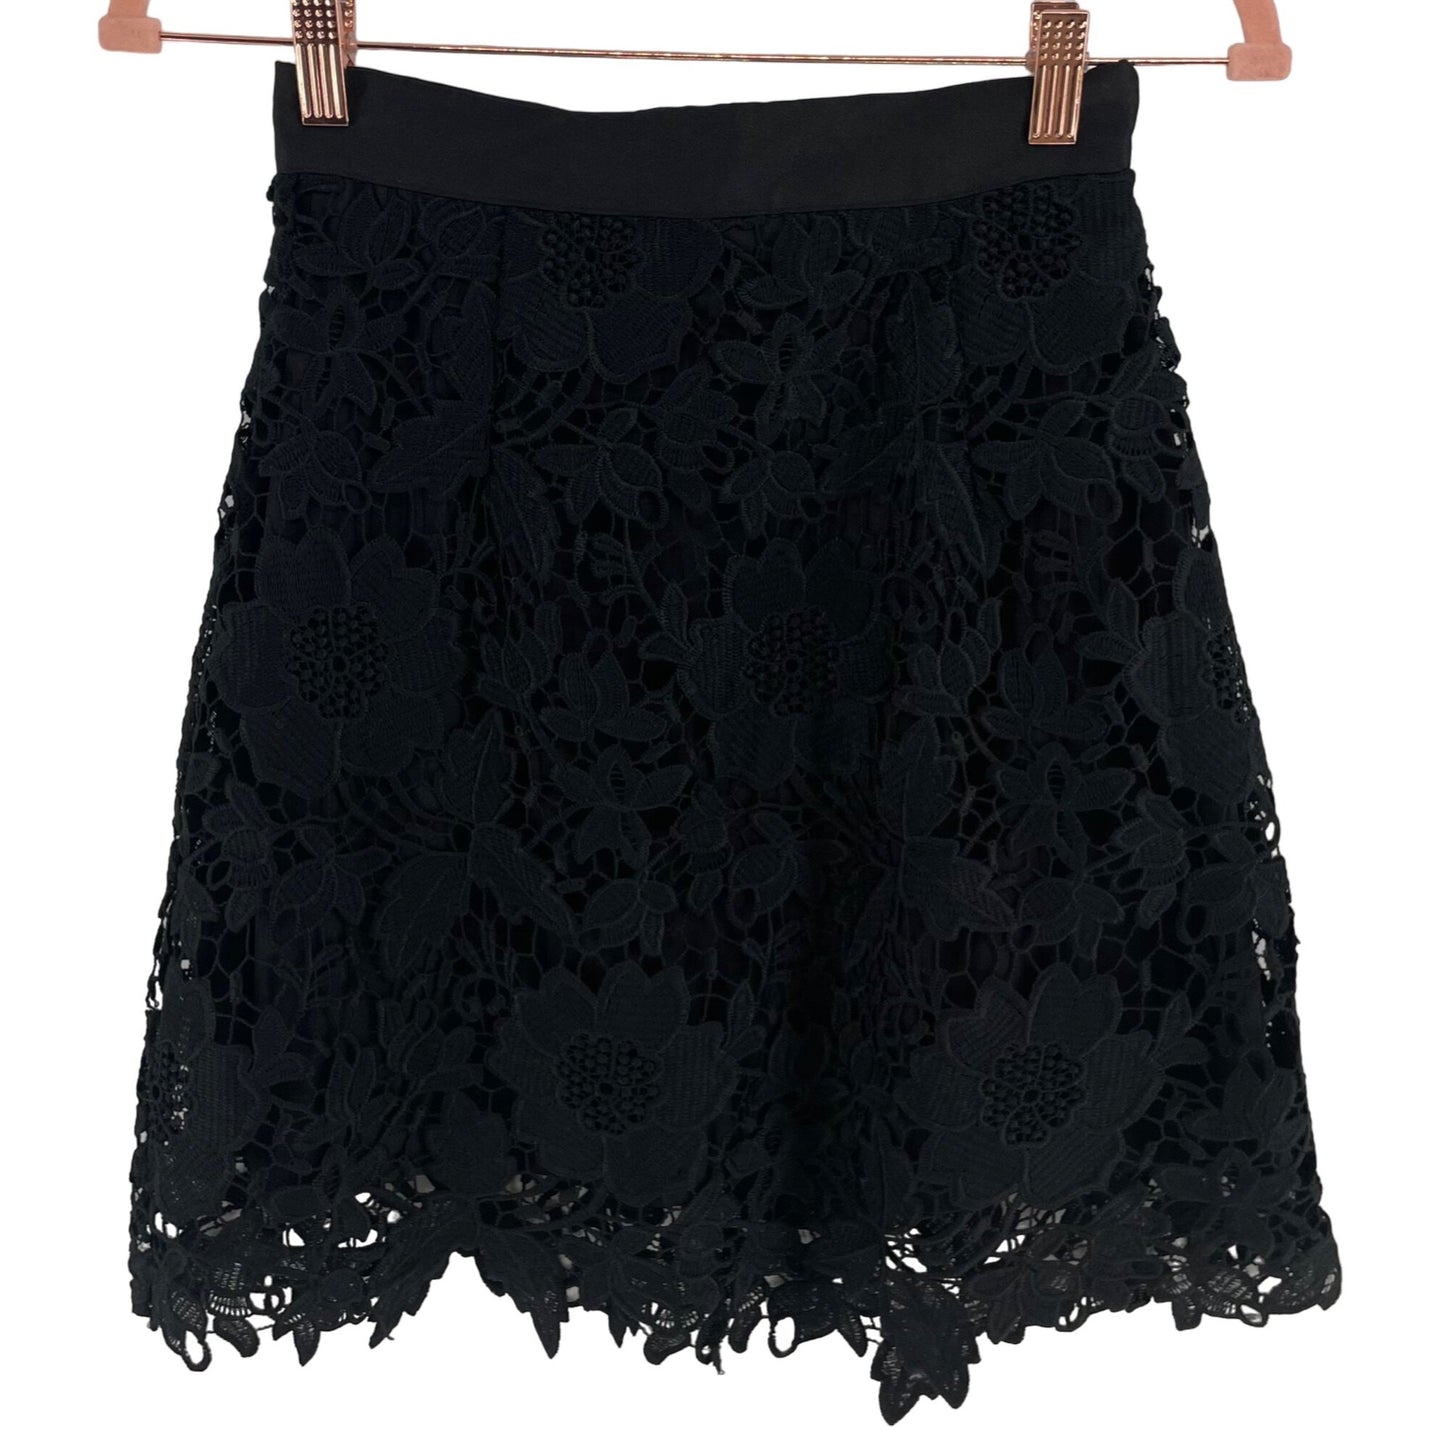 Atmosphere Women's Size 8 Black Floral Lace Skirt